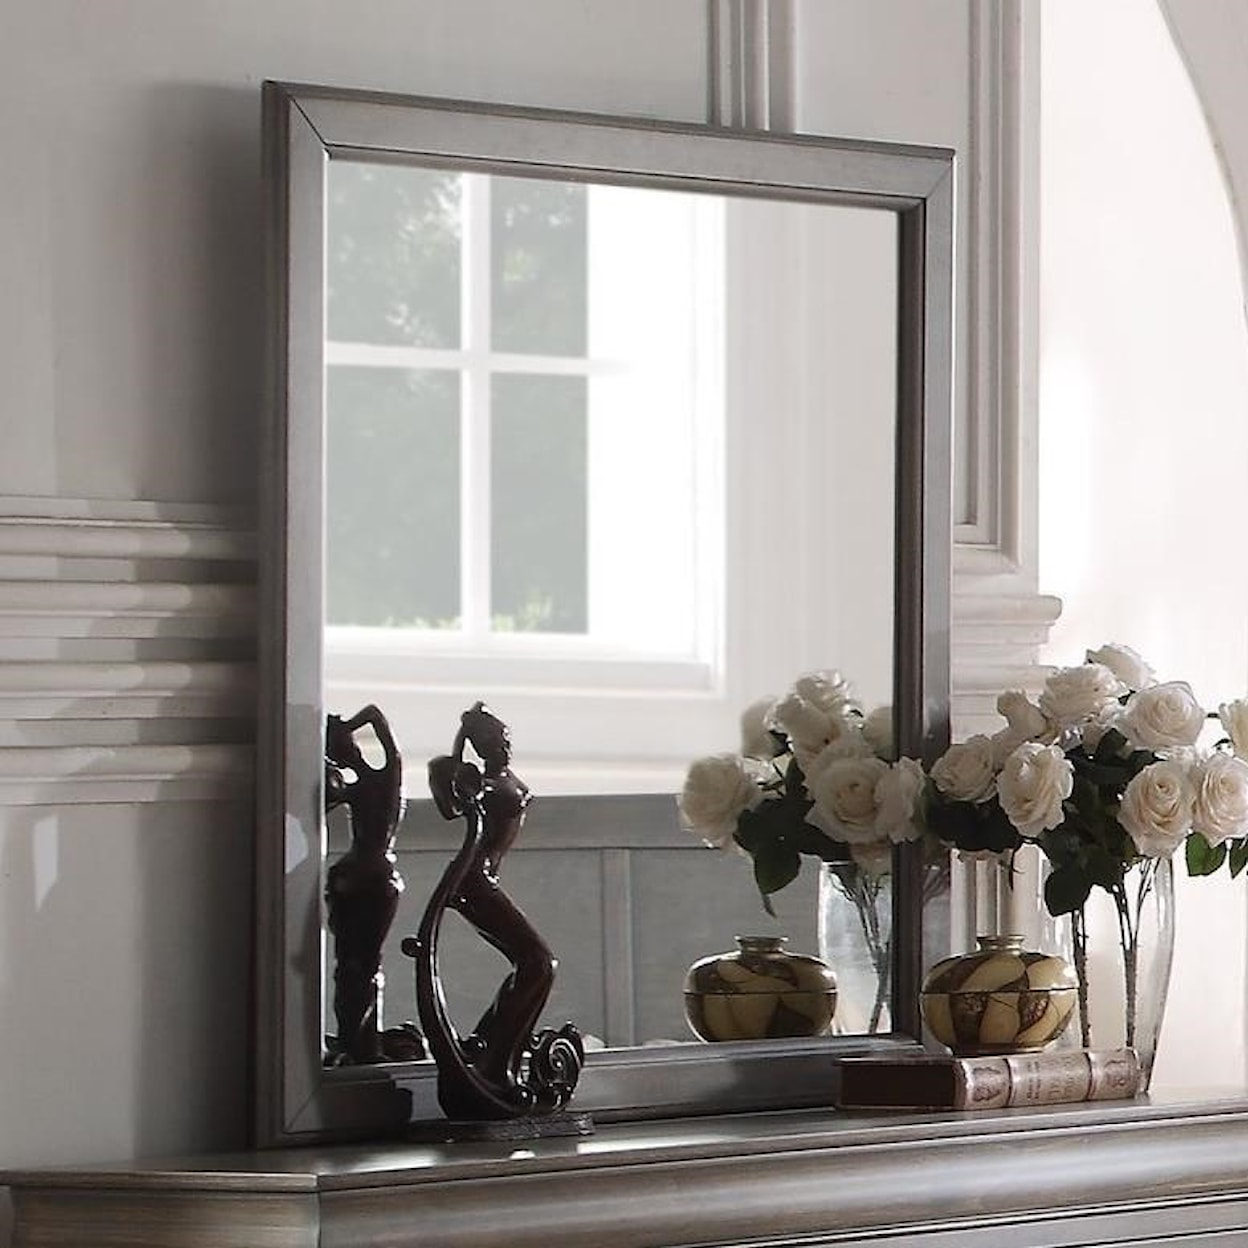 Acme Louis Philippe lll Mirror in Gray 25504 by Dining Rooms